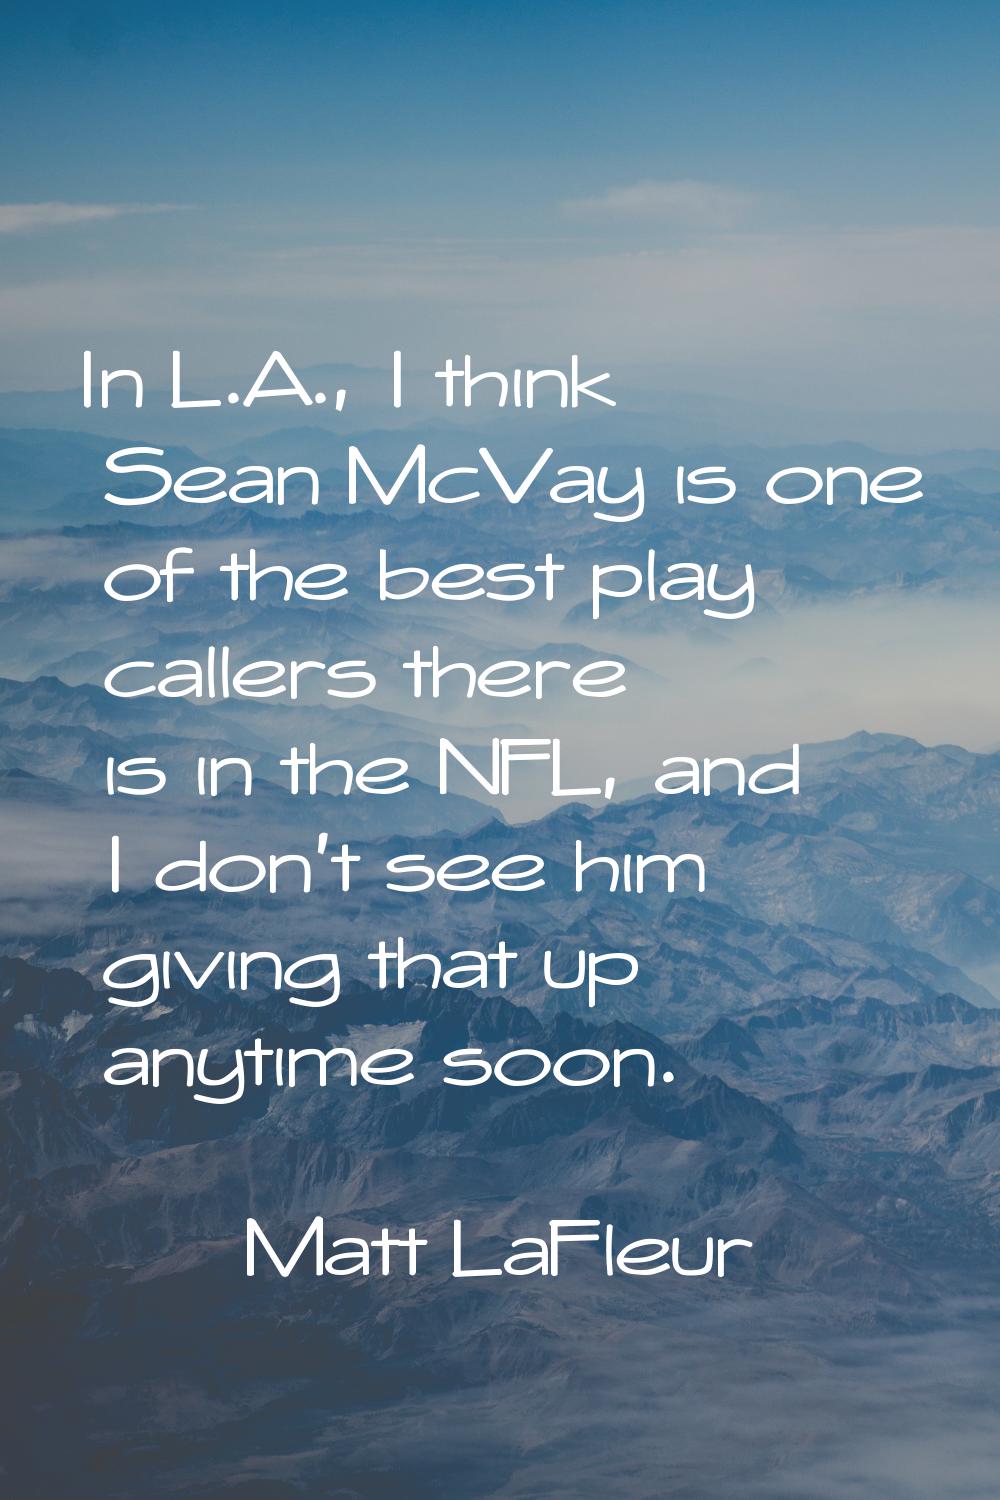 In L.A., I think Sean McVay is one of the best play callers there is in the NFL, and I don't see hi